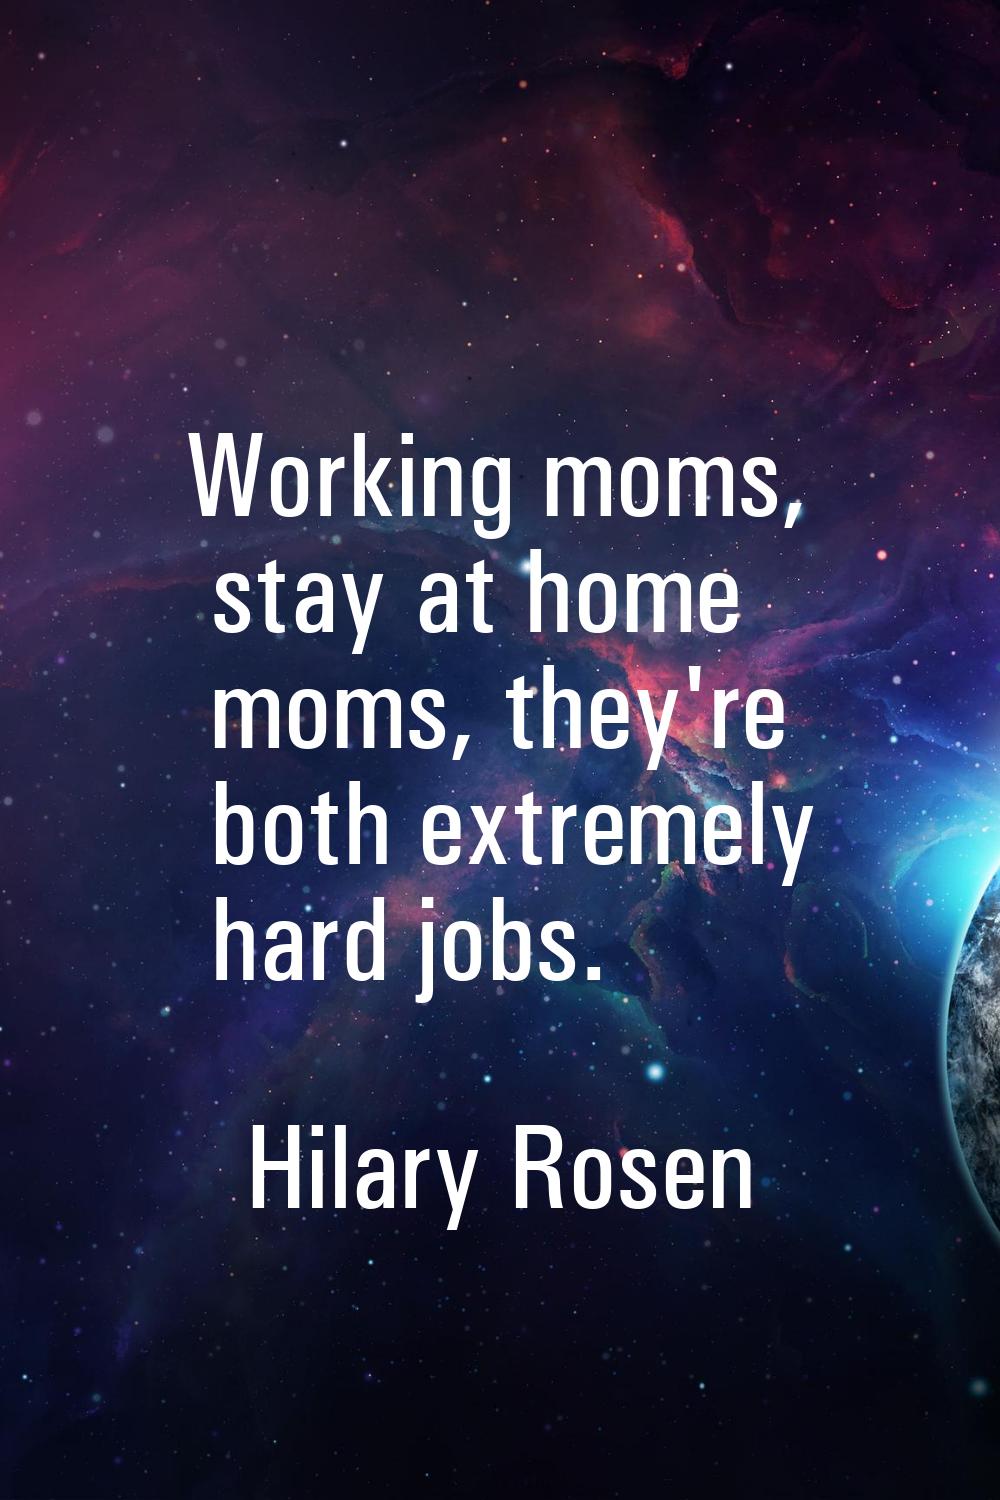 Working moms, stay at home moms, they're both extremely hard jobs.